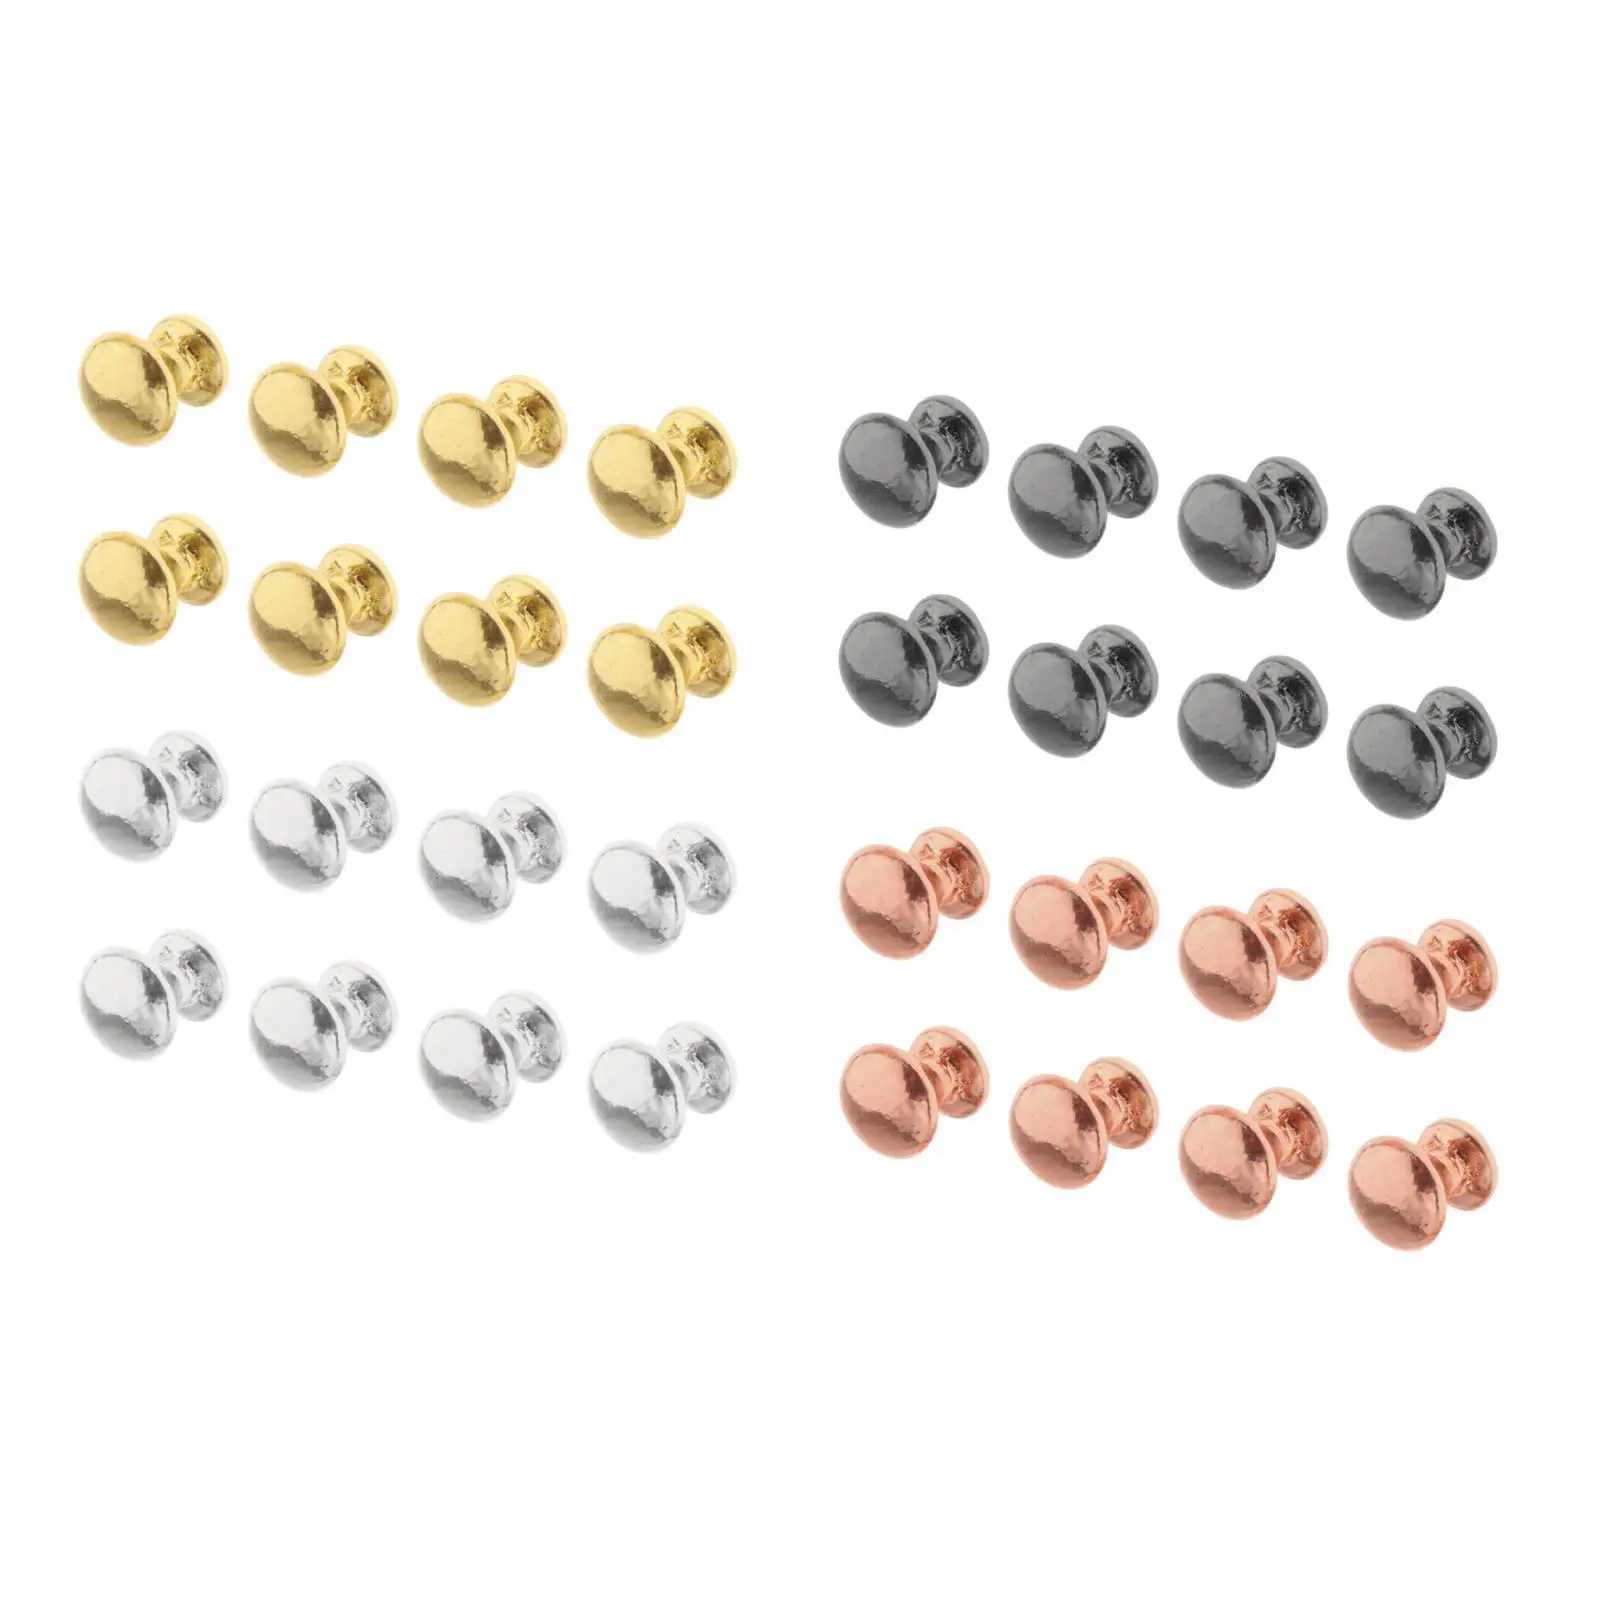 

8 Pieces Dollhouse Door Knobs 1:12 Scale Miniature Round Head Pull Handle, Simulation BJD Doll Parts, Doll House Supplies